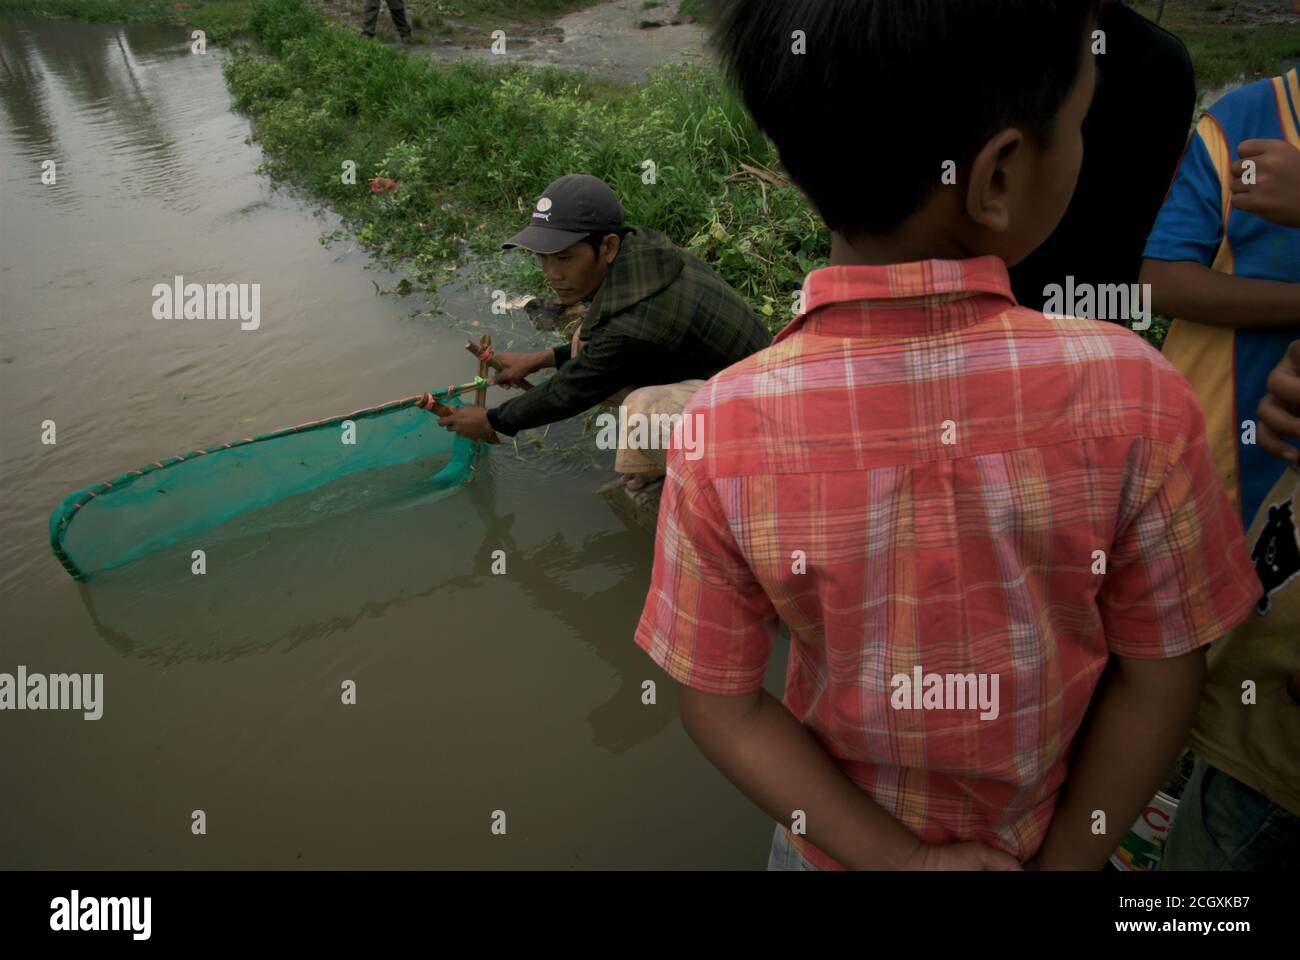 A man handling a pushnet, fishing on the bank of an irrigation canal in Karawang regency, West Java province, Indonesia. Stock Photo